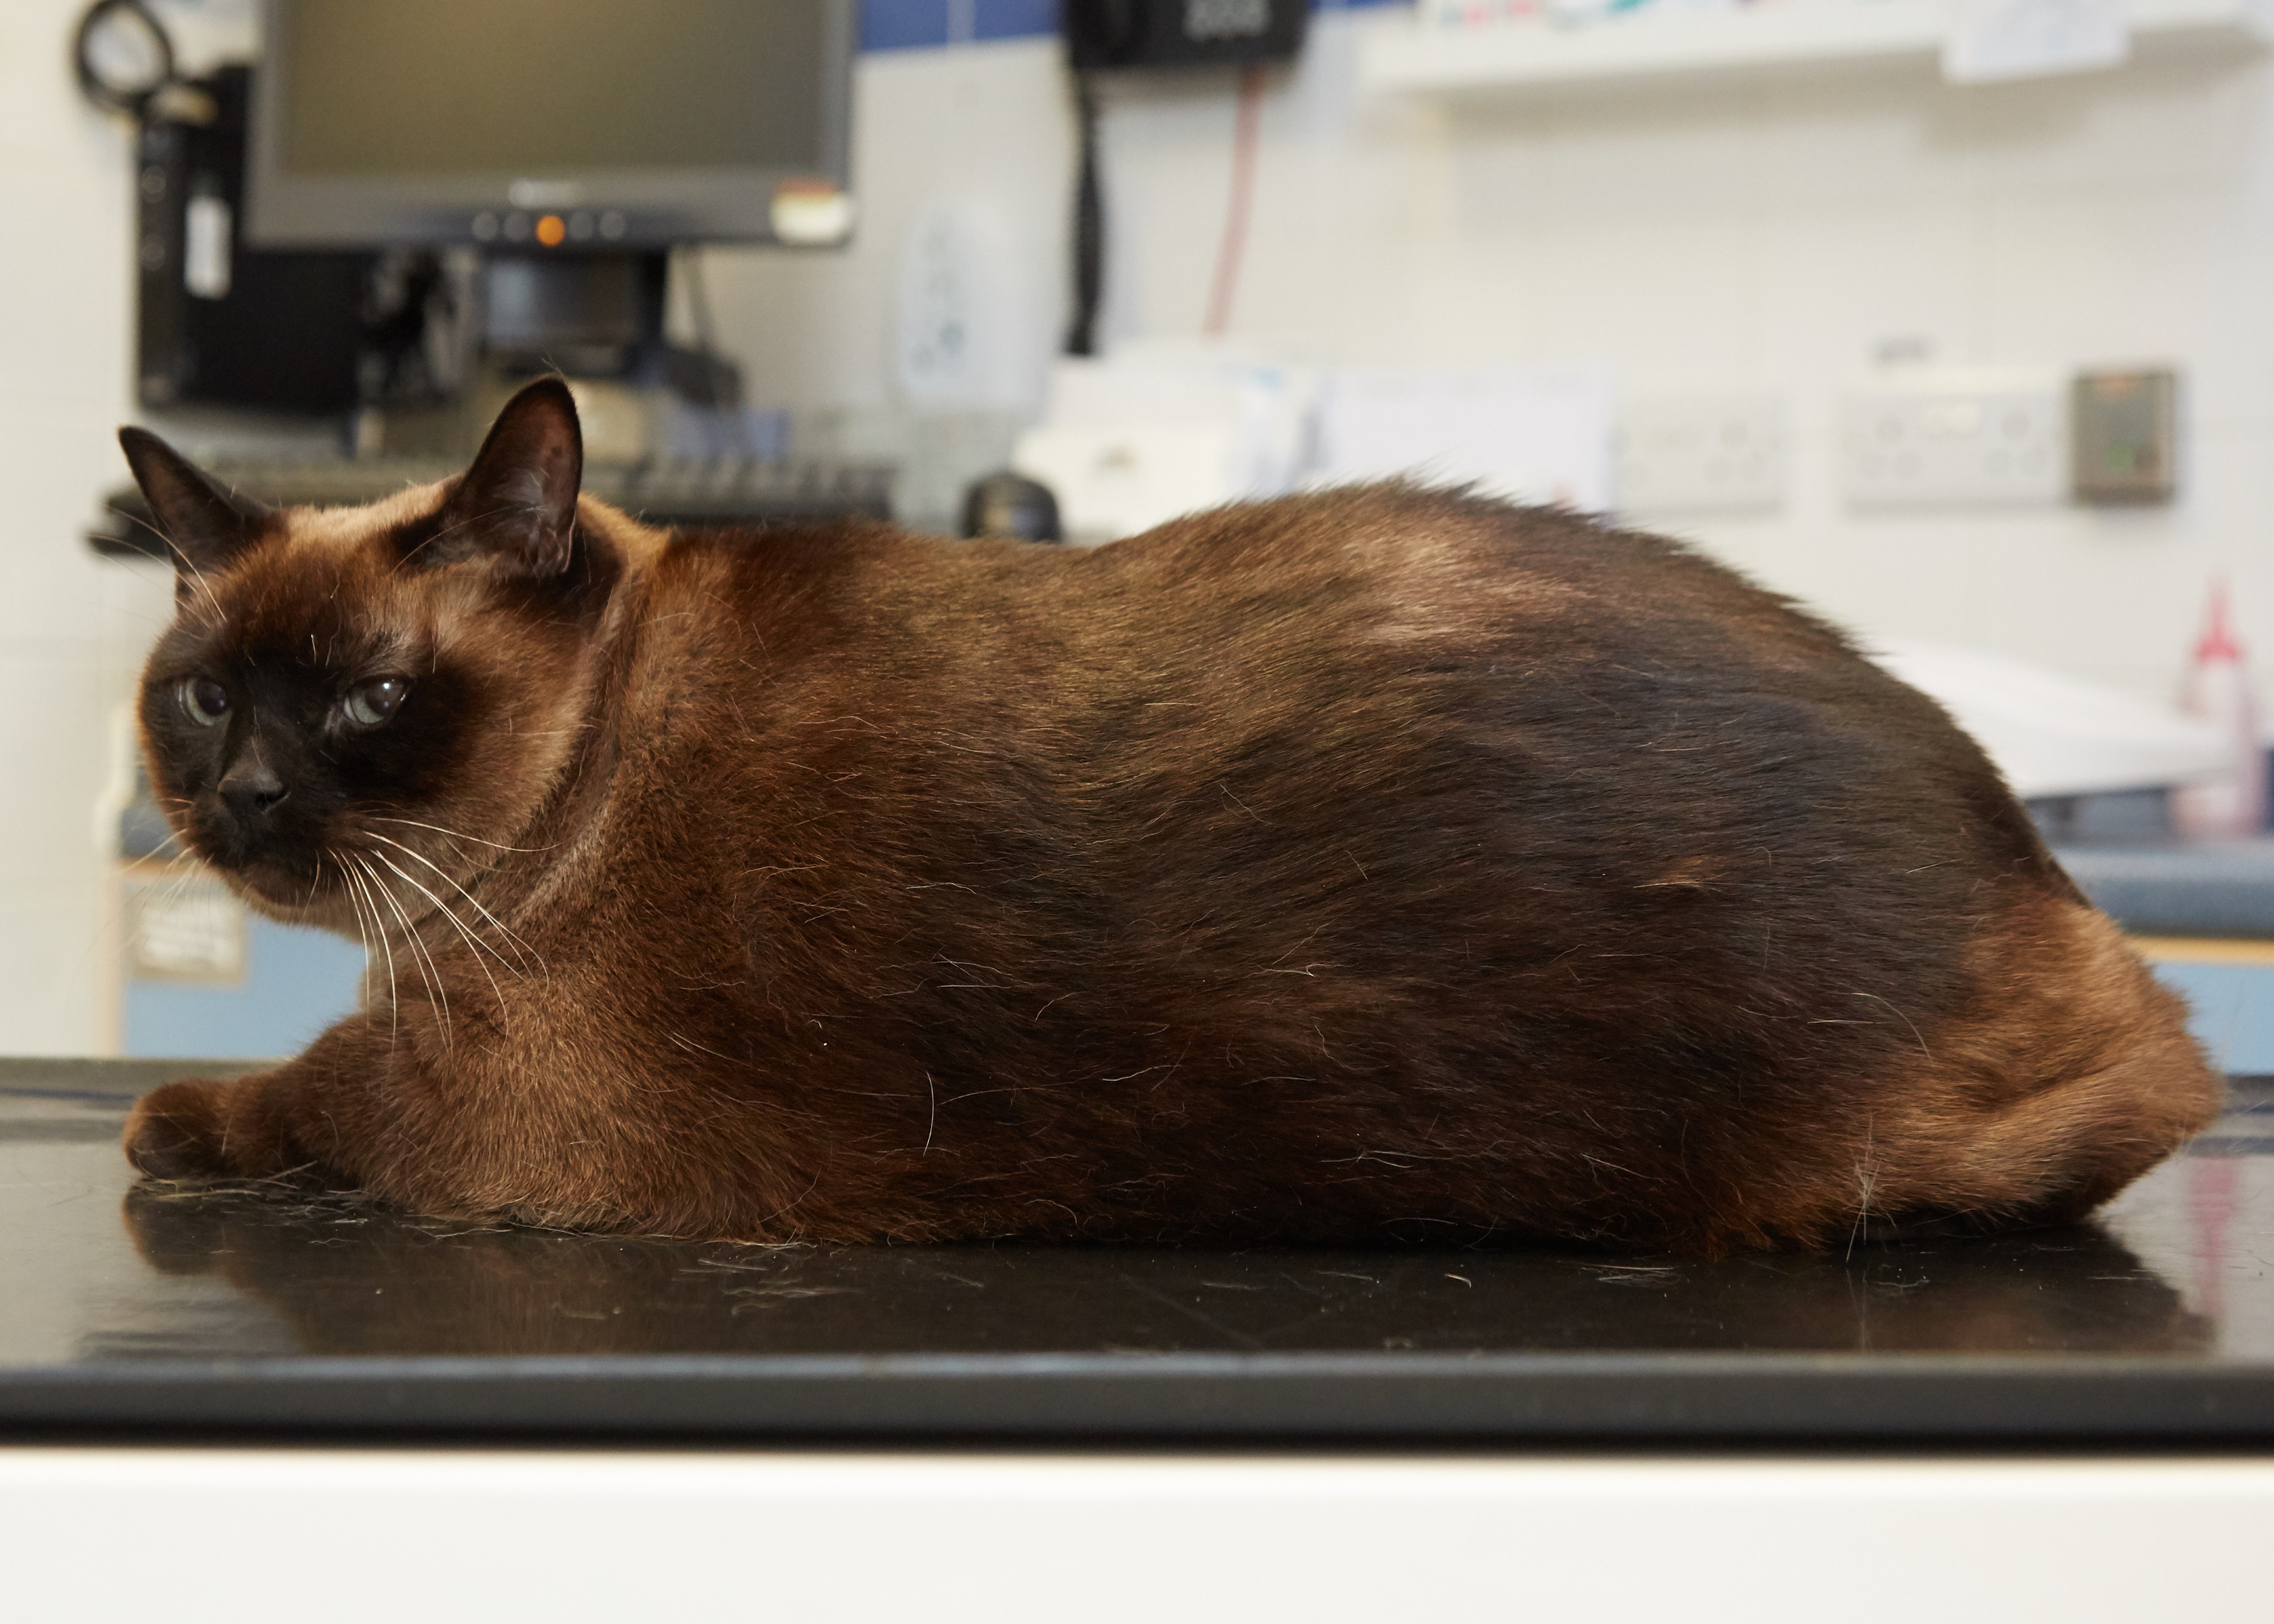 Elvis the cat is one of the entrants to the PDSA Pet Fit Club slimming competition (PDSA/PA)